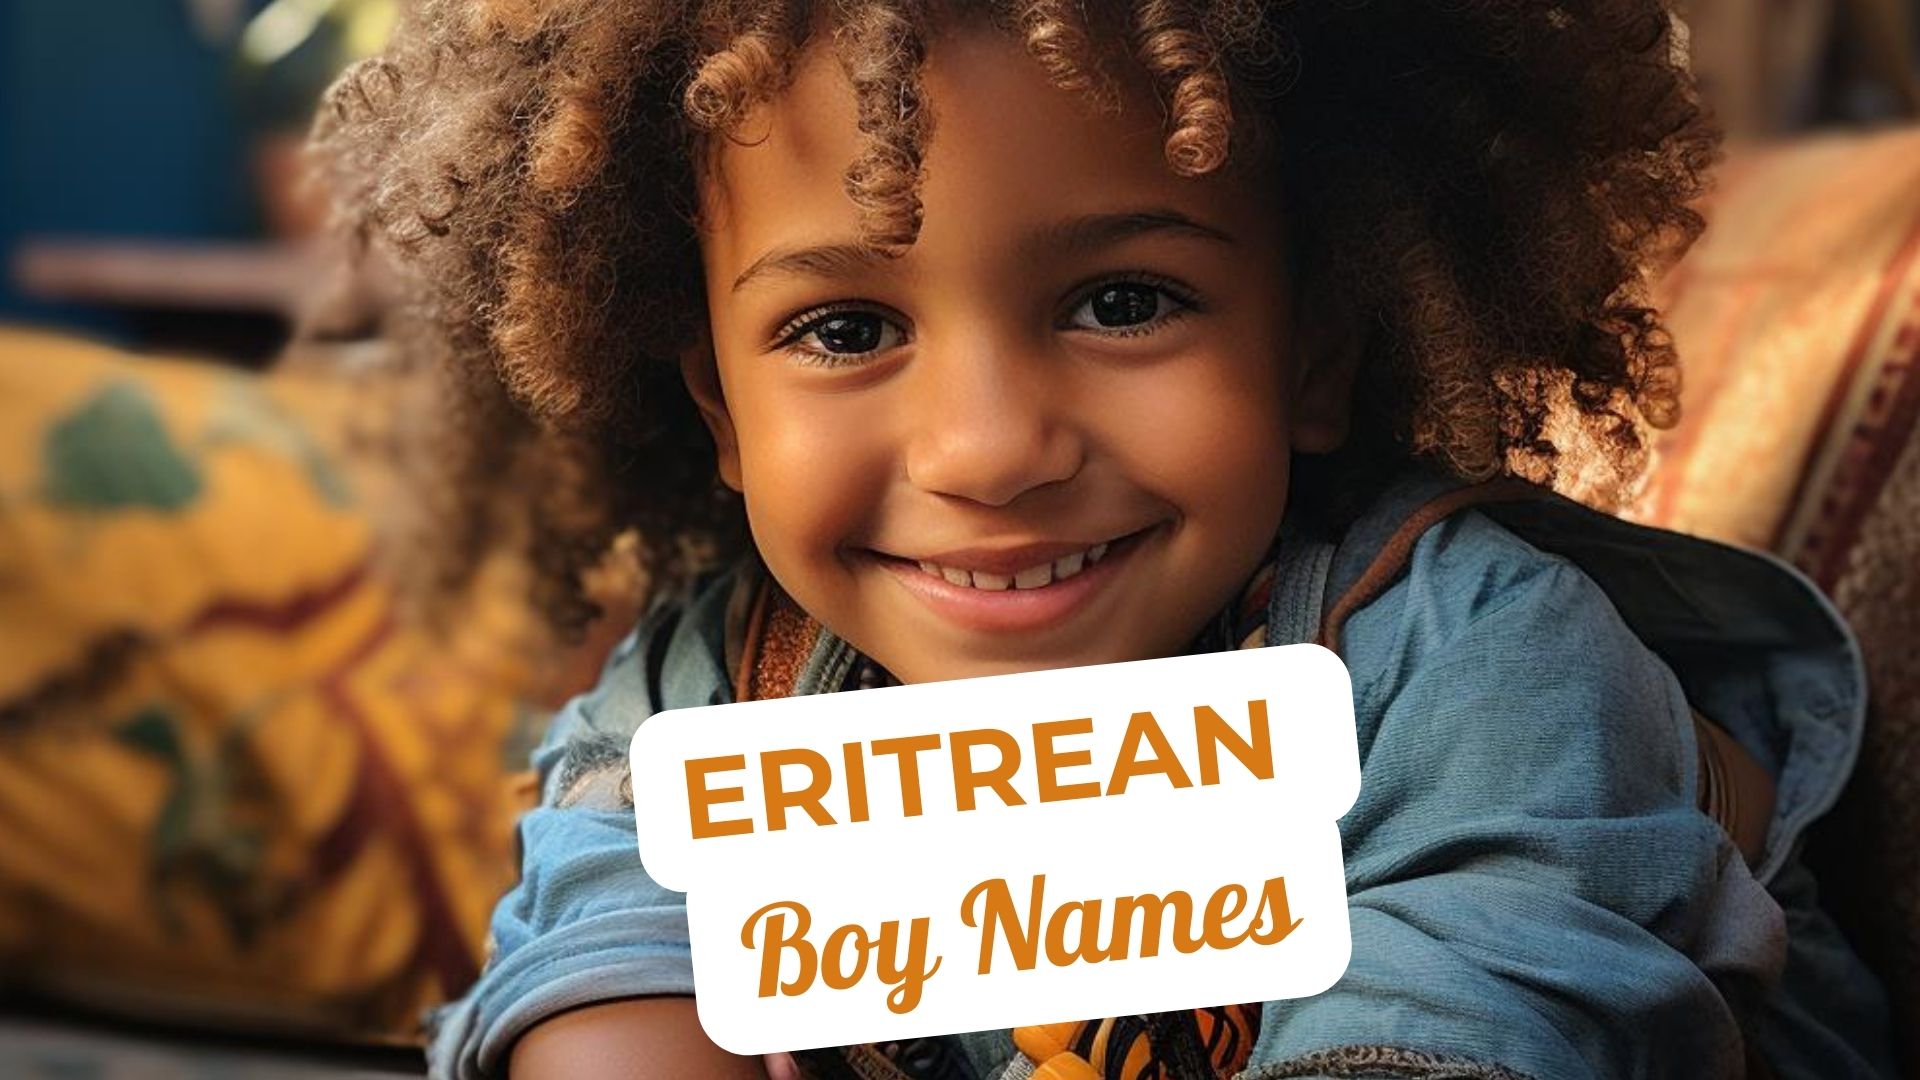 Best Eritrean Names and Their Meanings